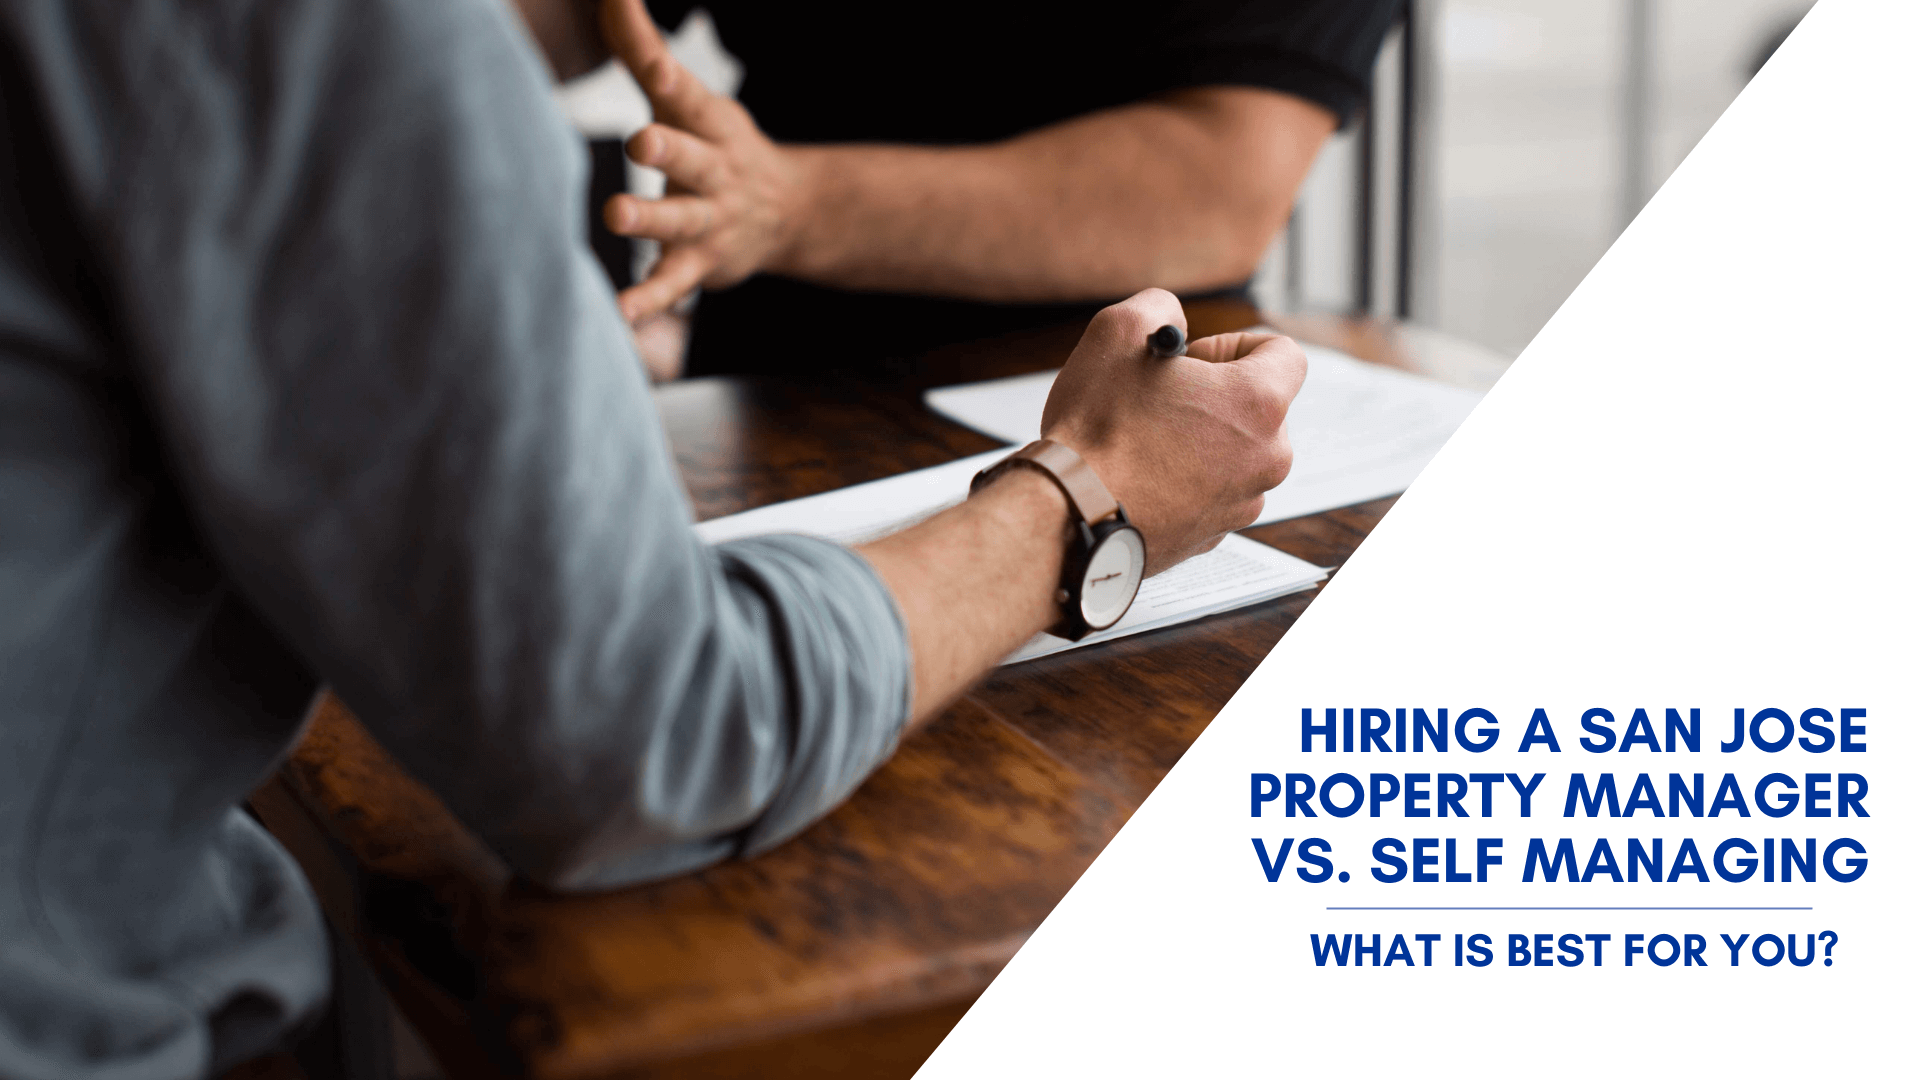 Hiring a San Jose Property Manager vs. Self Managing – What is Best for You?